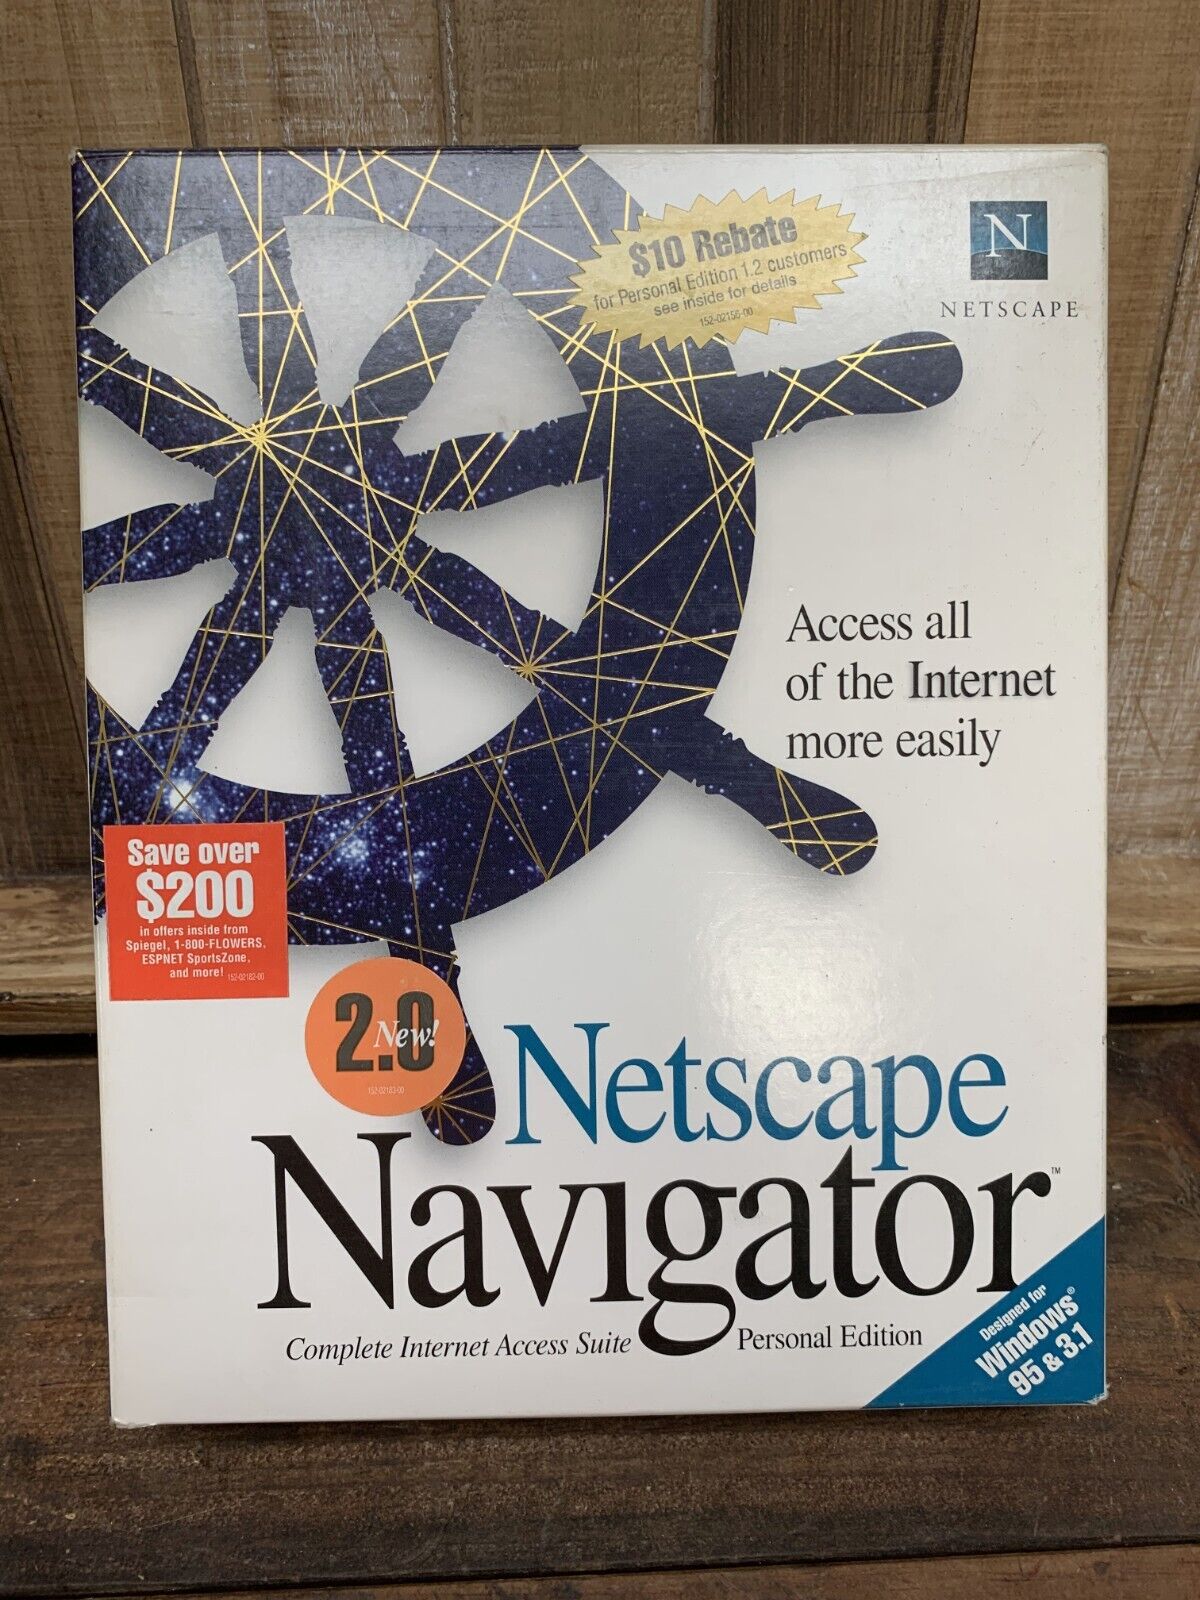 Netscape Navigator Personal Edition Complete Internet Suite for Windows 95 & 3.1